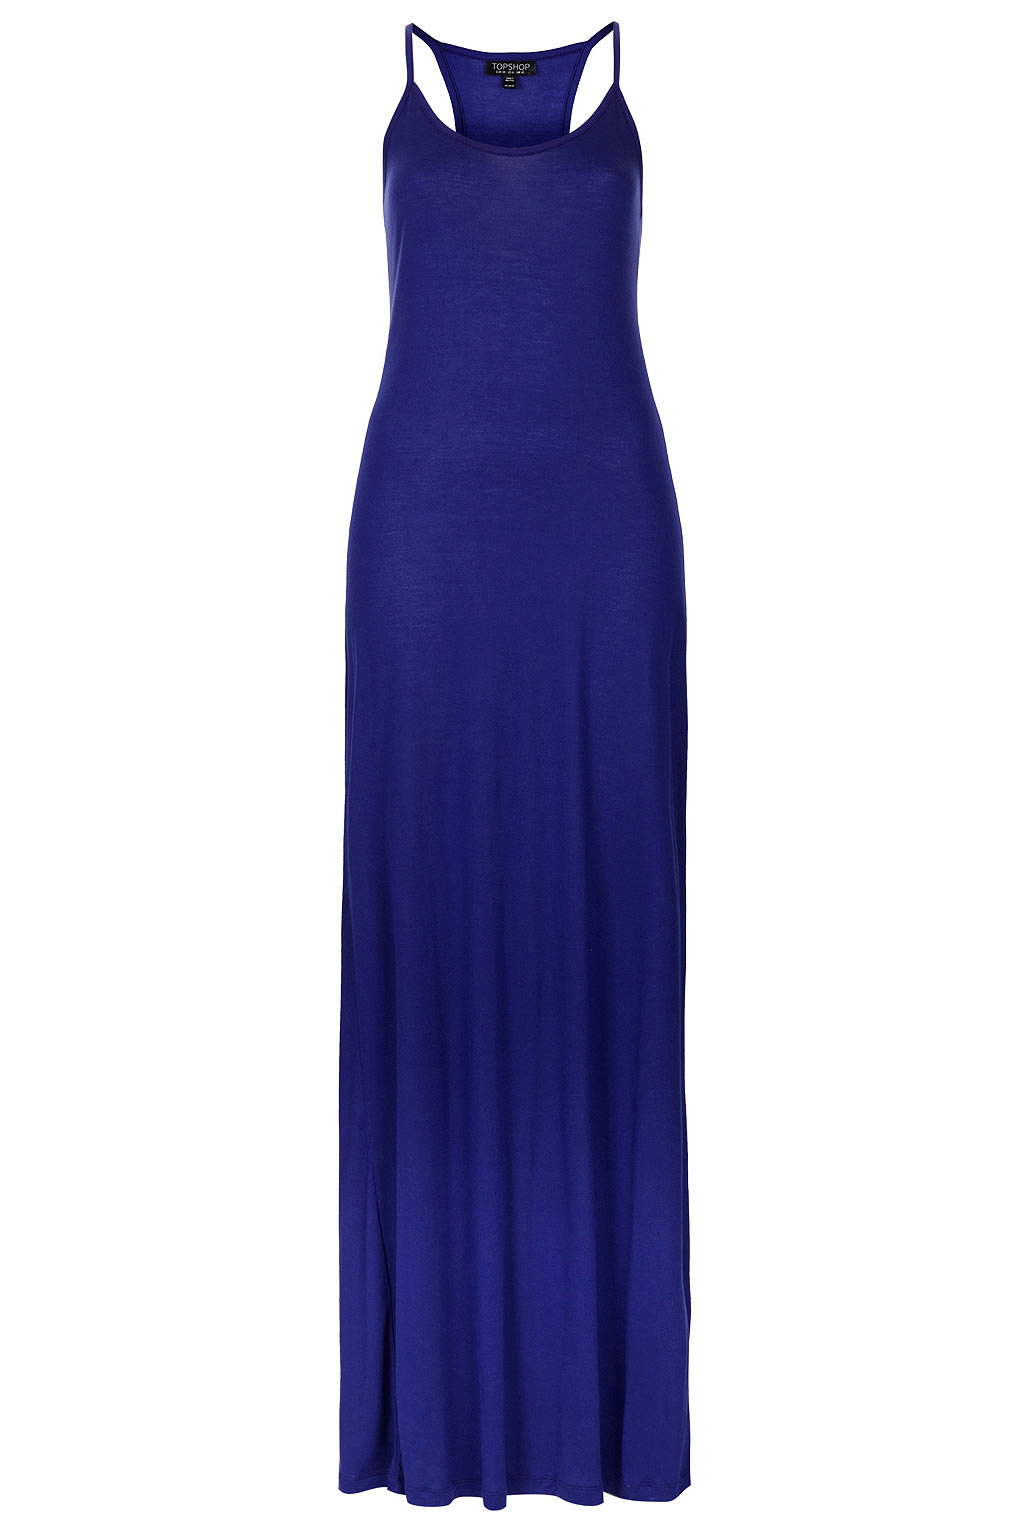 Lyst - Topshop Strappy Cami Maxi Dress in Blue